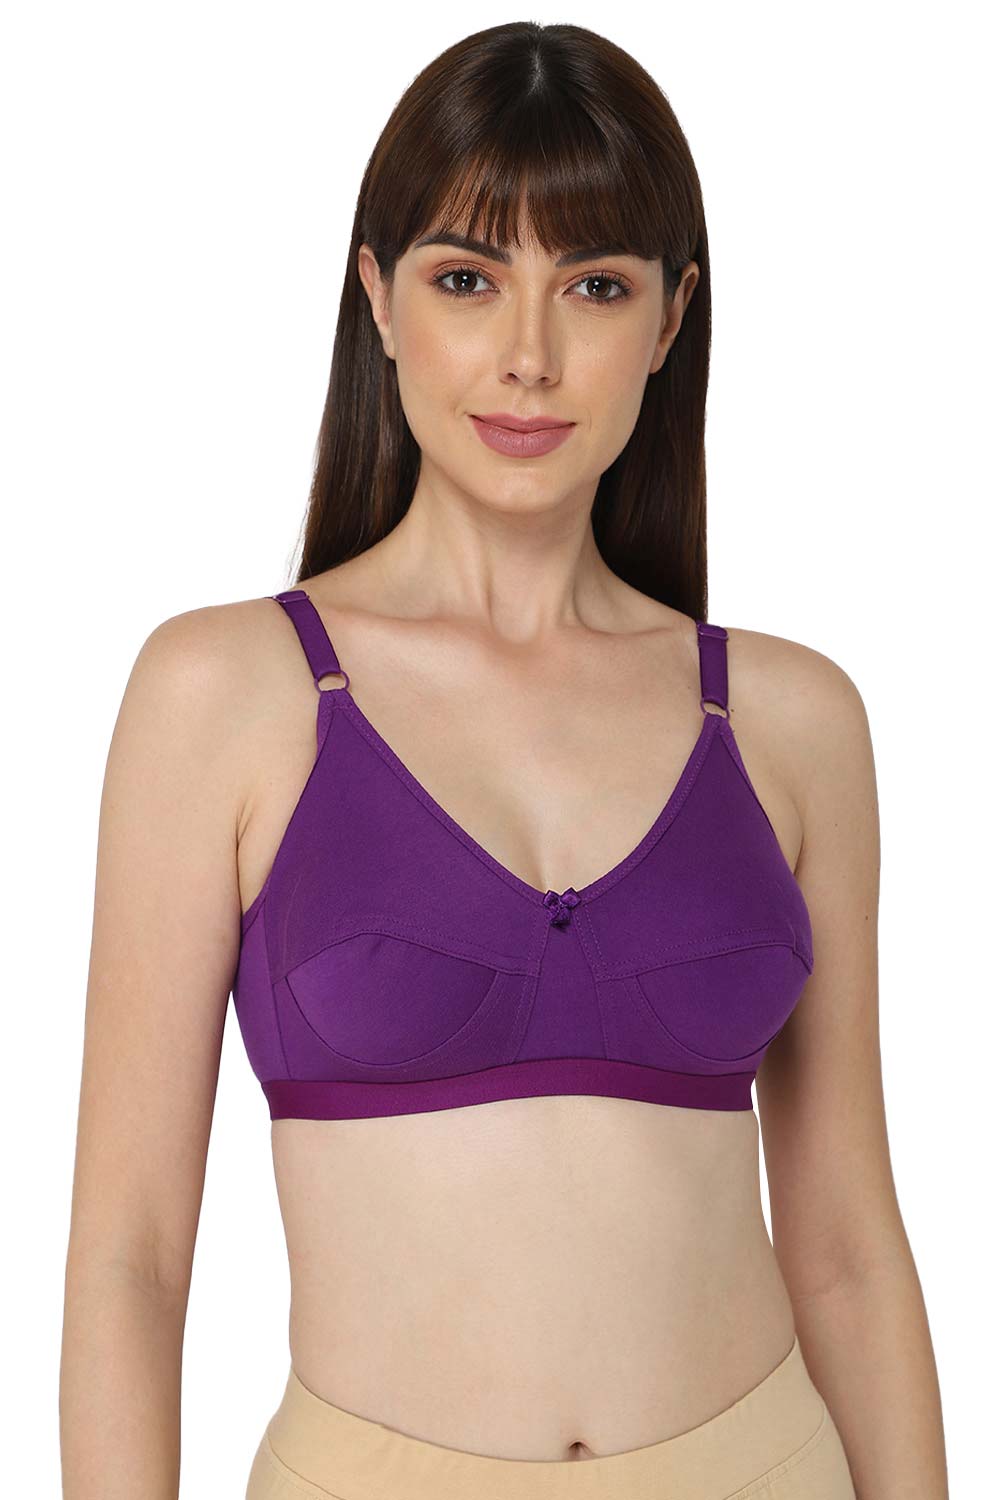 Intimacy Saree Bra Special Combo Pack - INT01 - C42